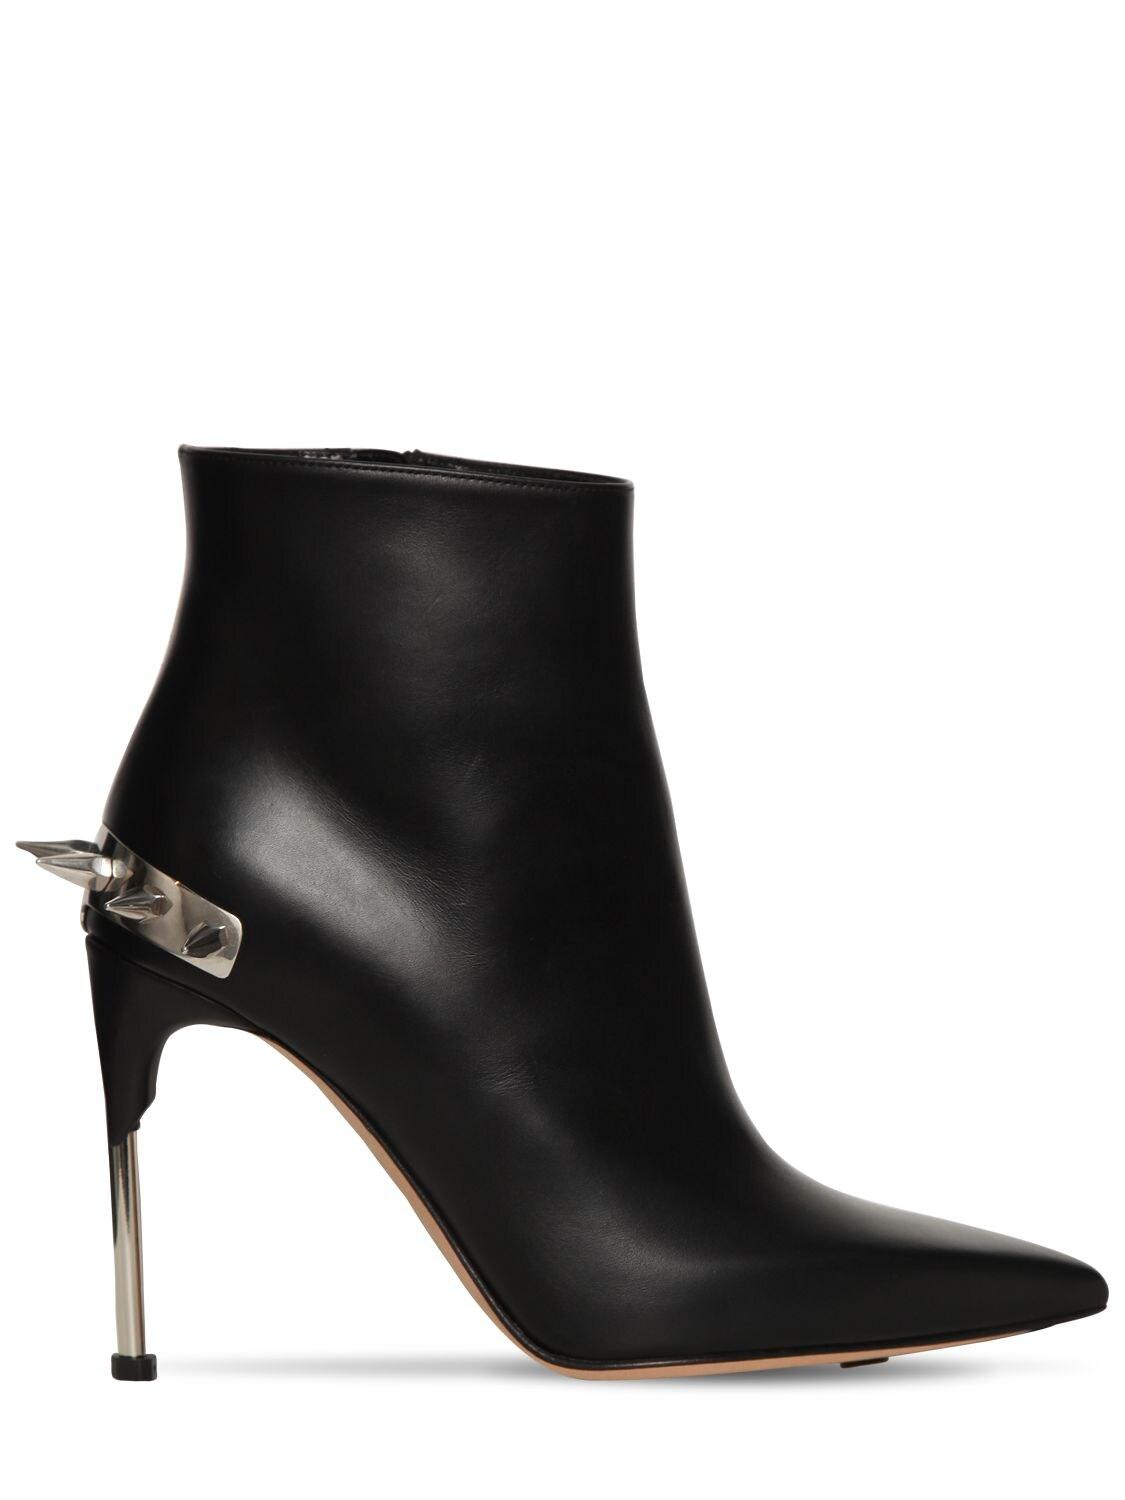 Alexander McQueen Embellished Leather Ankle Boots in Black - Save 23% ...